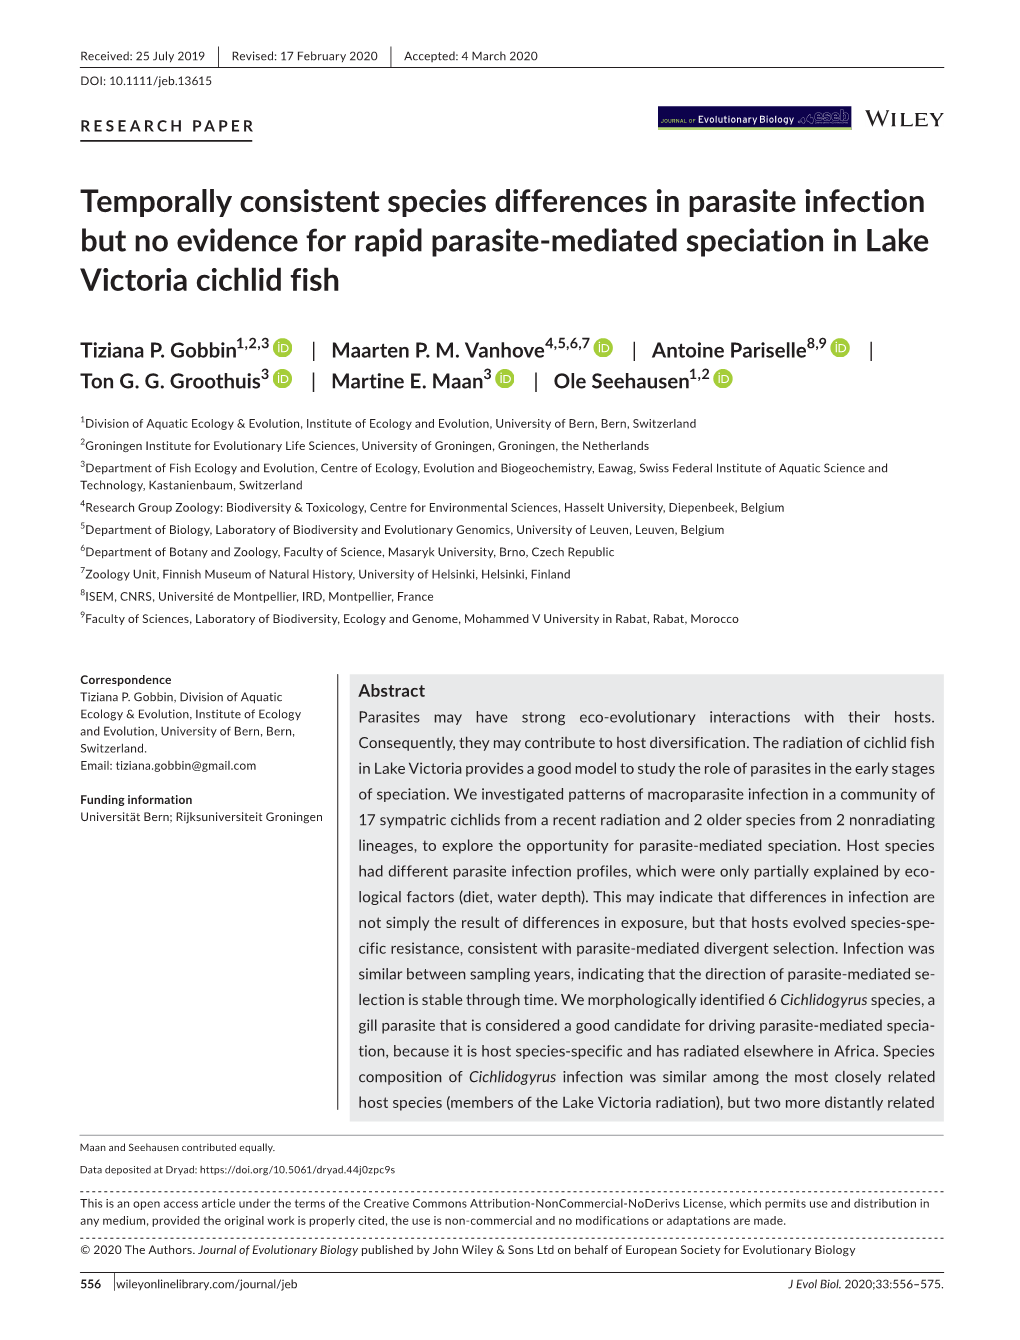 Temporally Consistent Species Differences in Parasite Infection but No Evidence for Rapid Parasite-Mediated Speciation in Lake Victoria Cichlid Fish